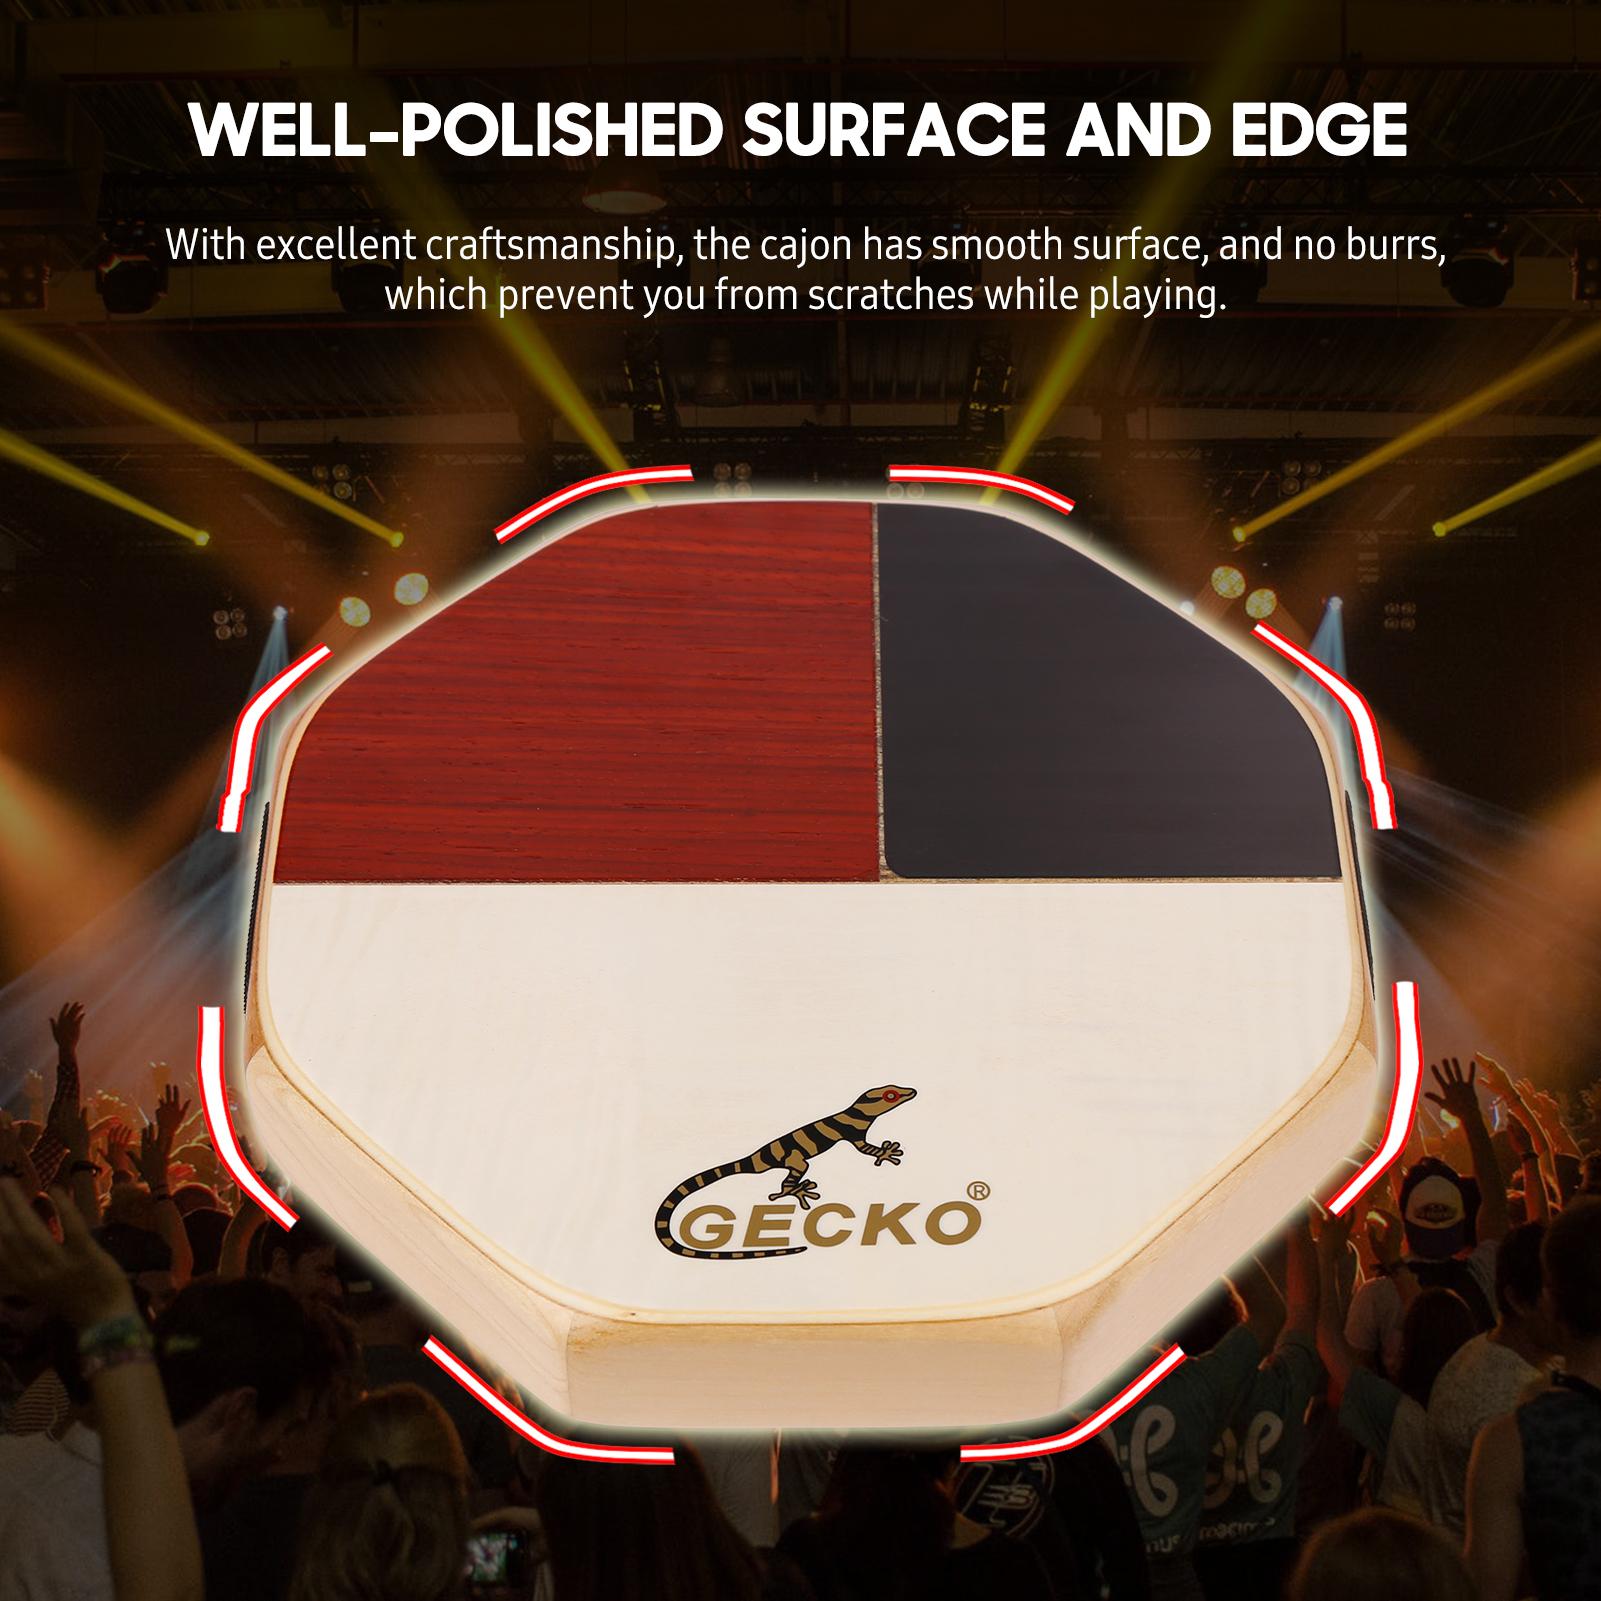 GECKO SD6 Cajon Hand Drum Cajon Drum Percussion Instrument with Carrying Bag Portable for Travel